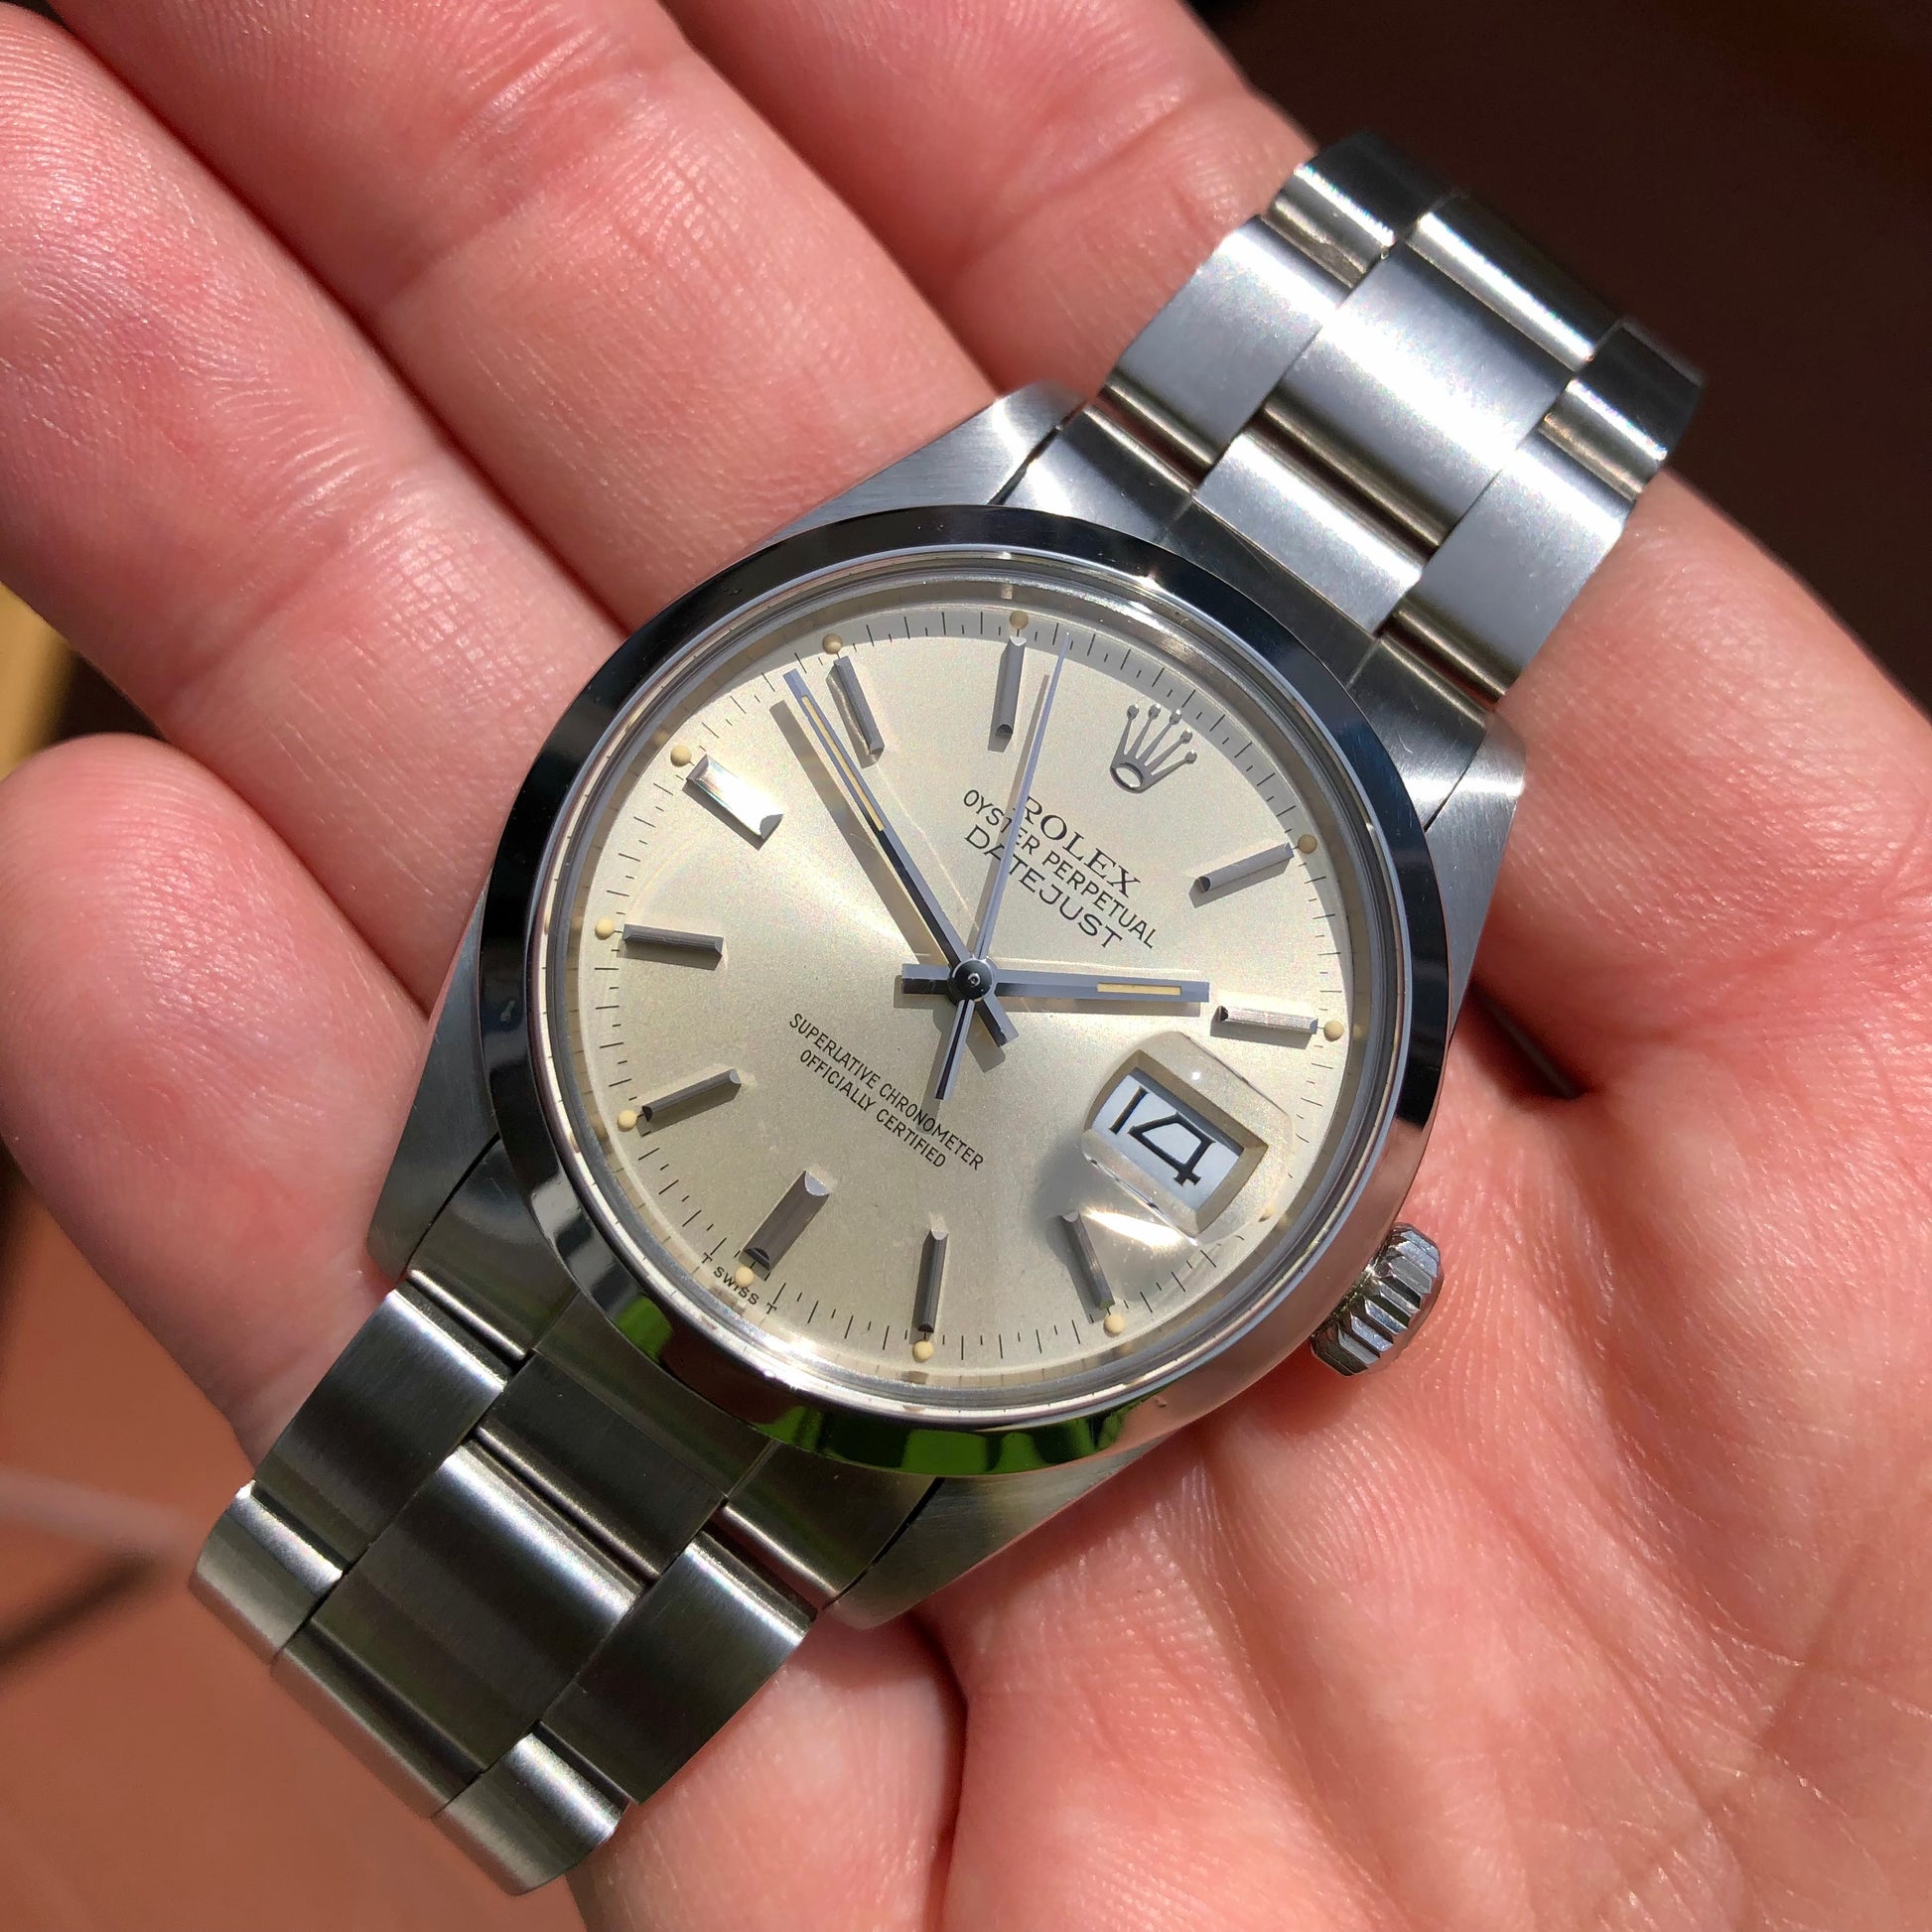 1982 Rolex Datejust 16000 Steel Oyster Silver Wristwatch with Box and Papers - Hashtag Watch Company